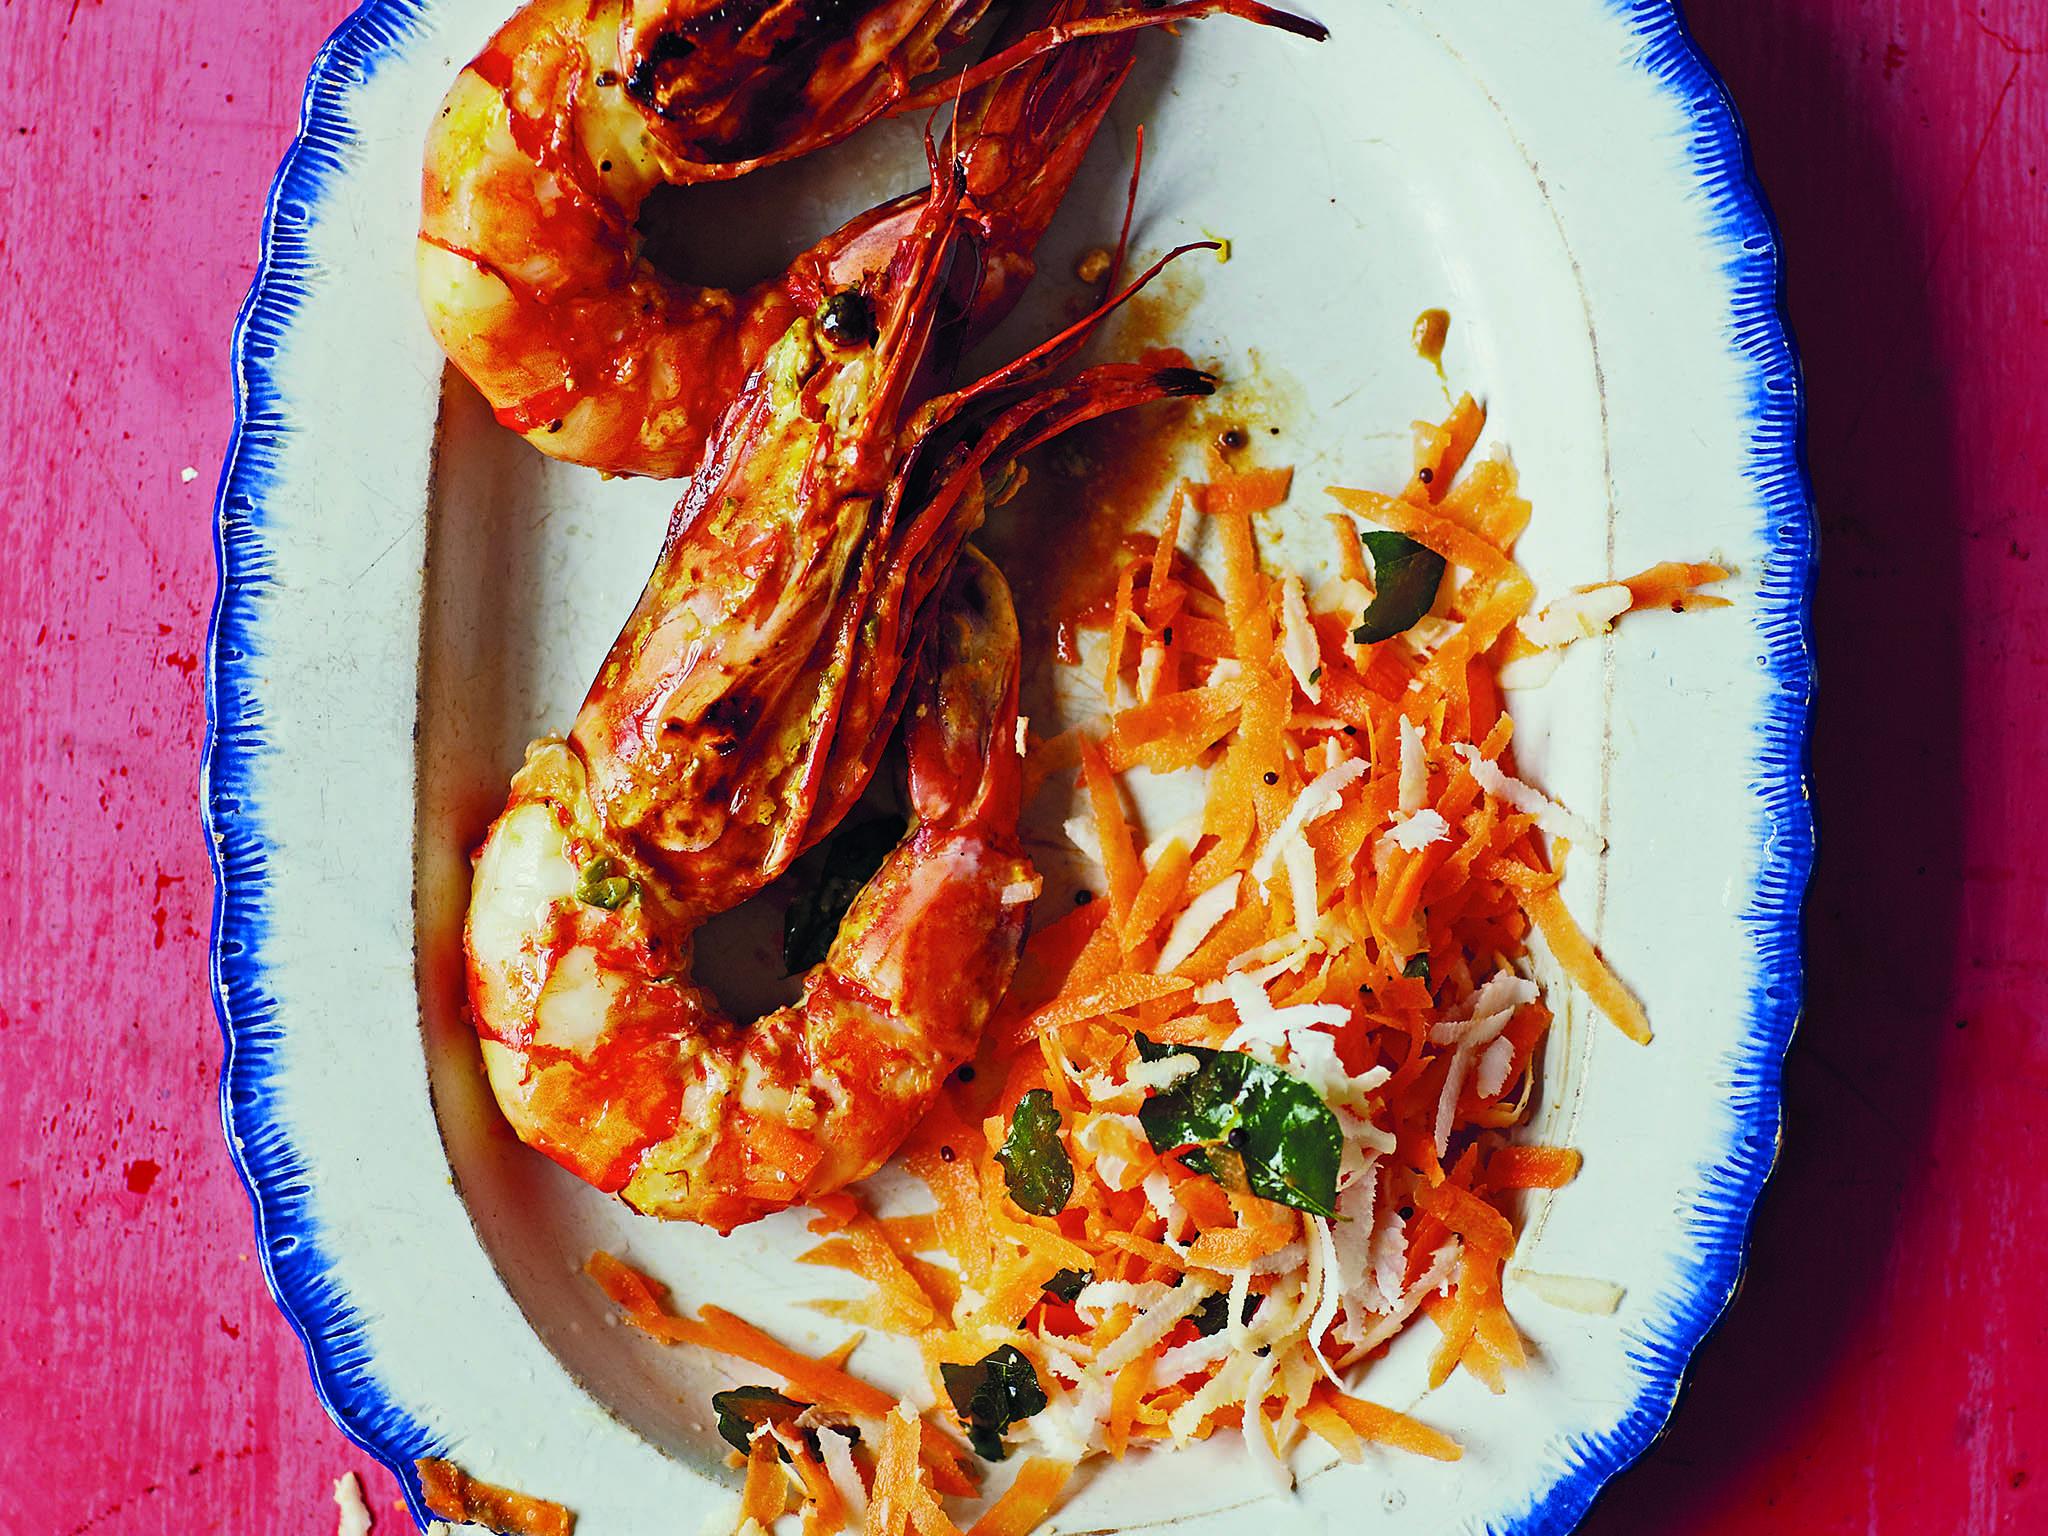 Traditionally these prawns would be cooked in a tandoor oven but a conventional one works just as well